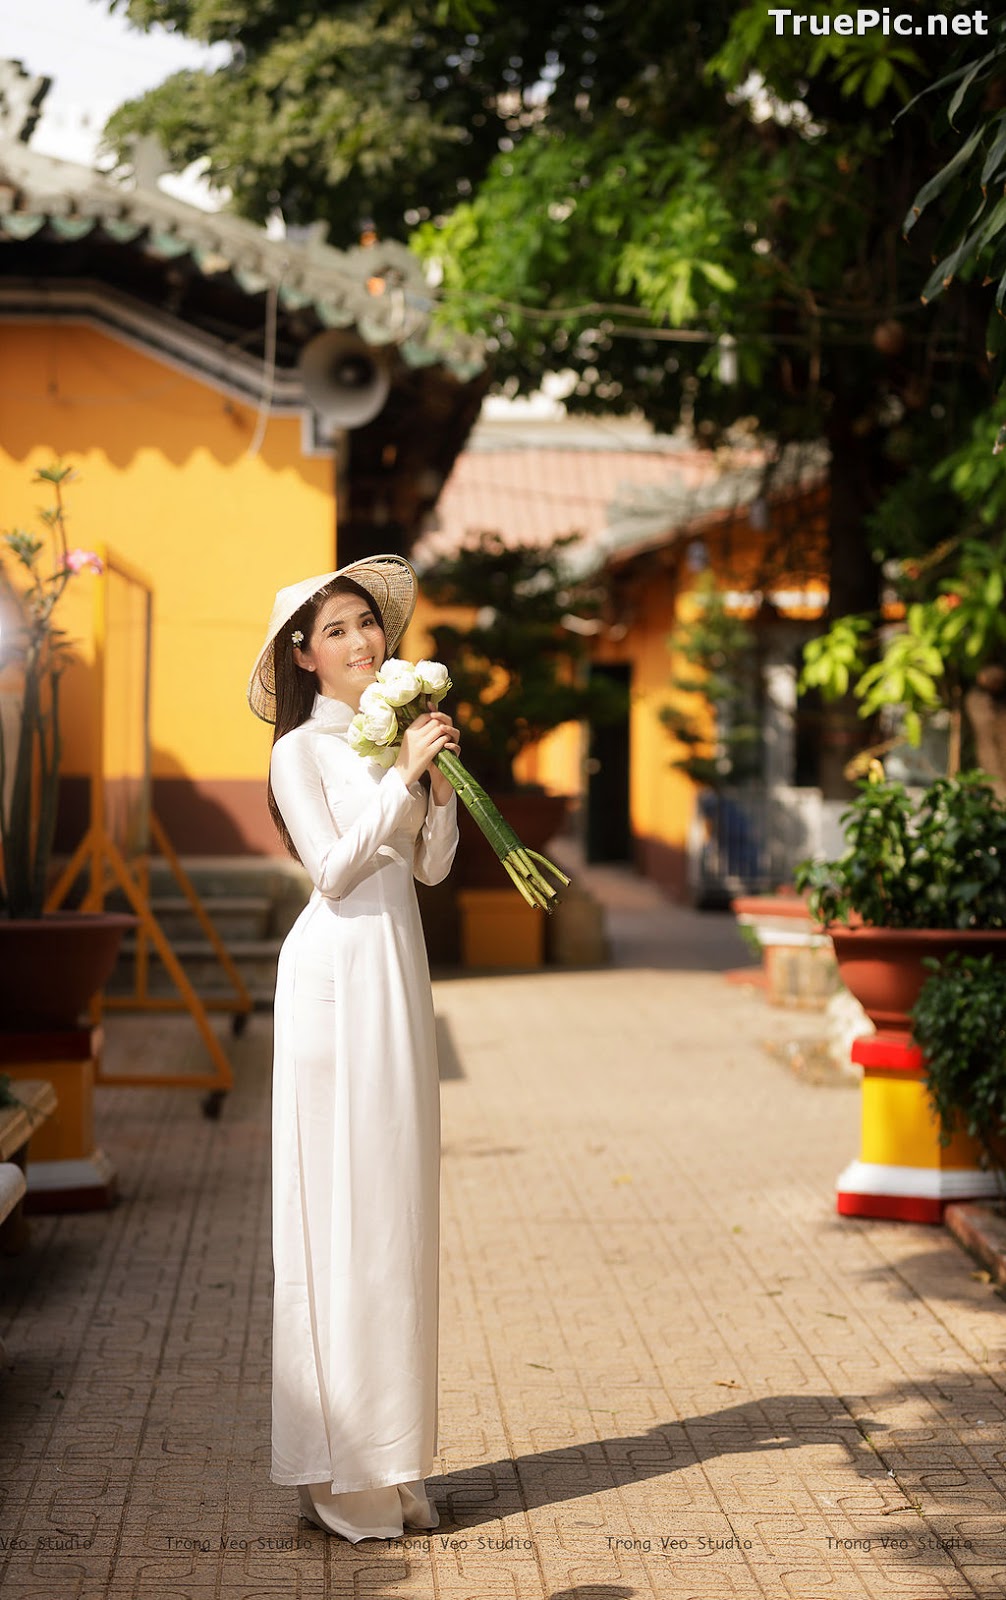 Image The Beauty of Vietnamese Girls with Traditional Dress (Ao Dai) #2 - TruePic.net - Picture-13